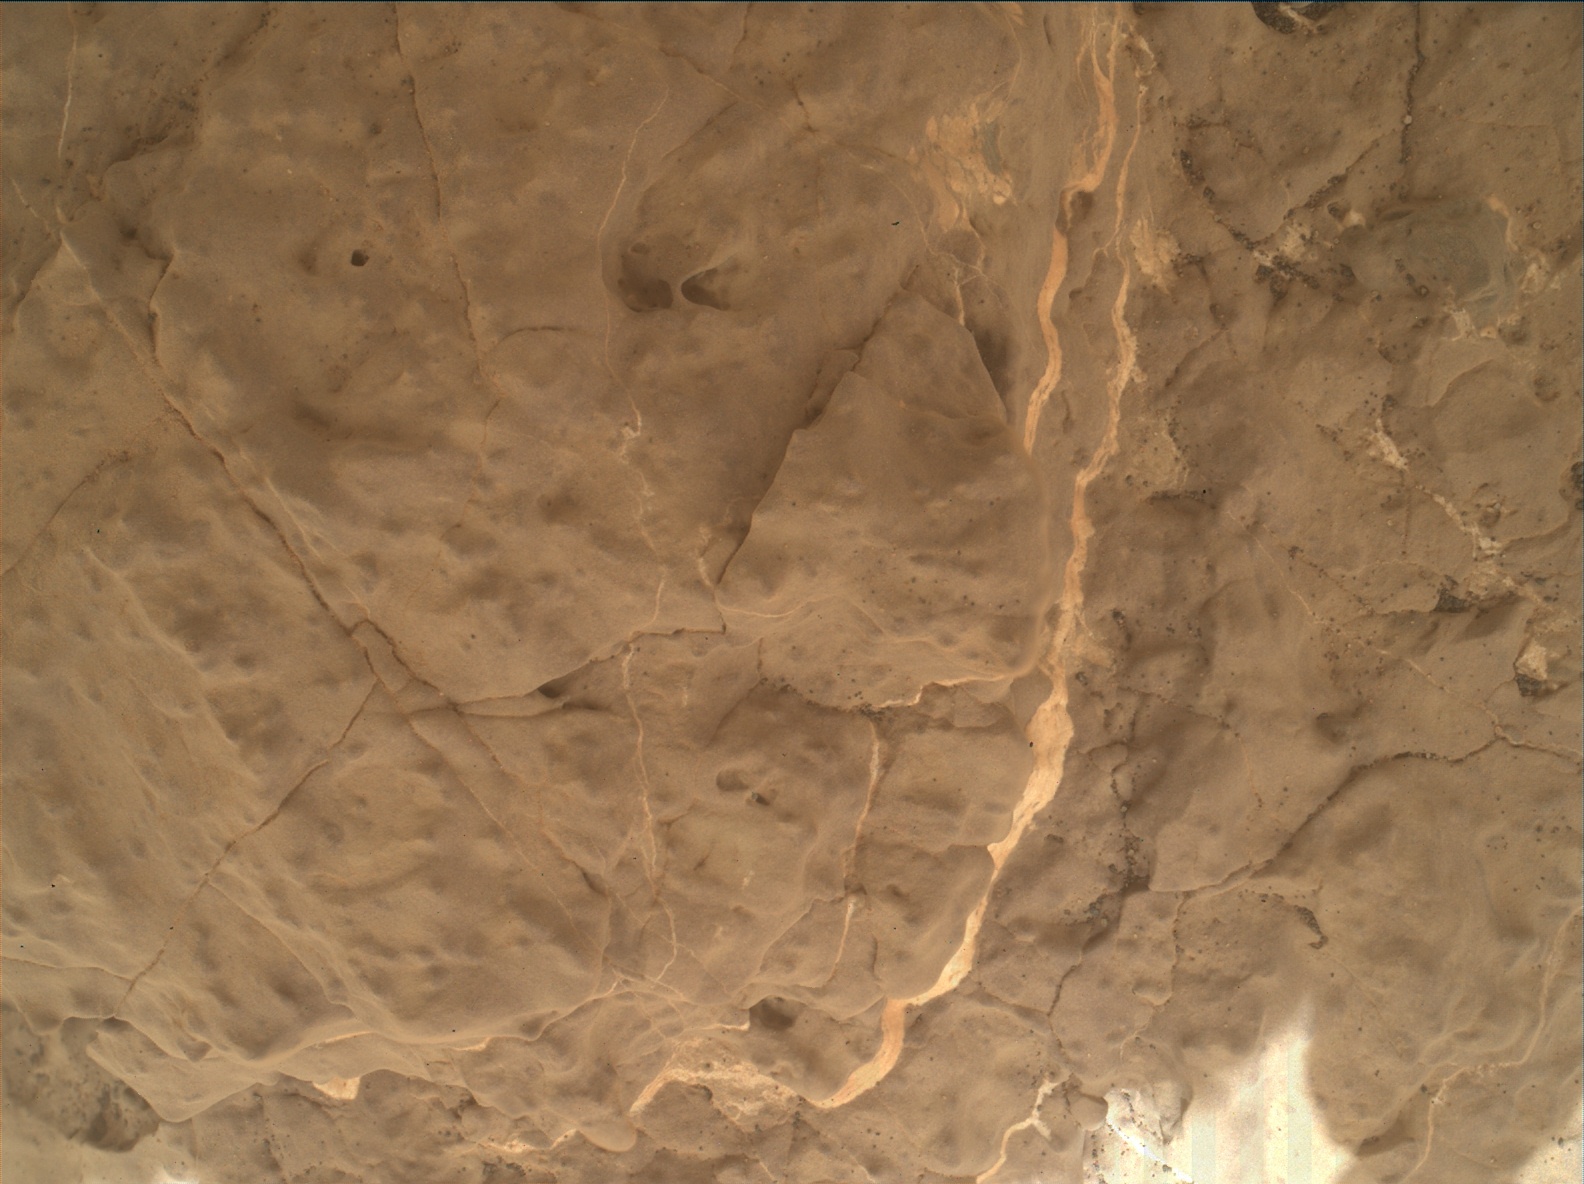 Nasa's Mars rover Curiosity acquired this image using its Mars Hand Lens Imager (MAHLI) on Sol 3028